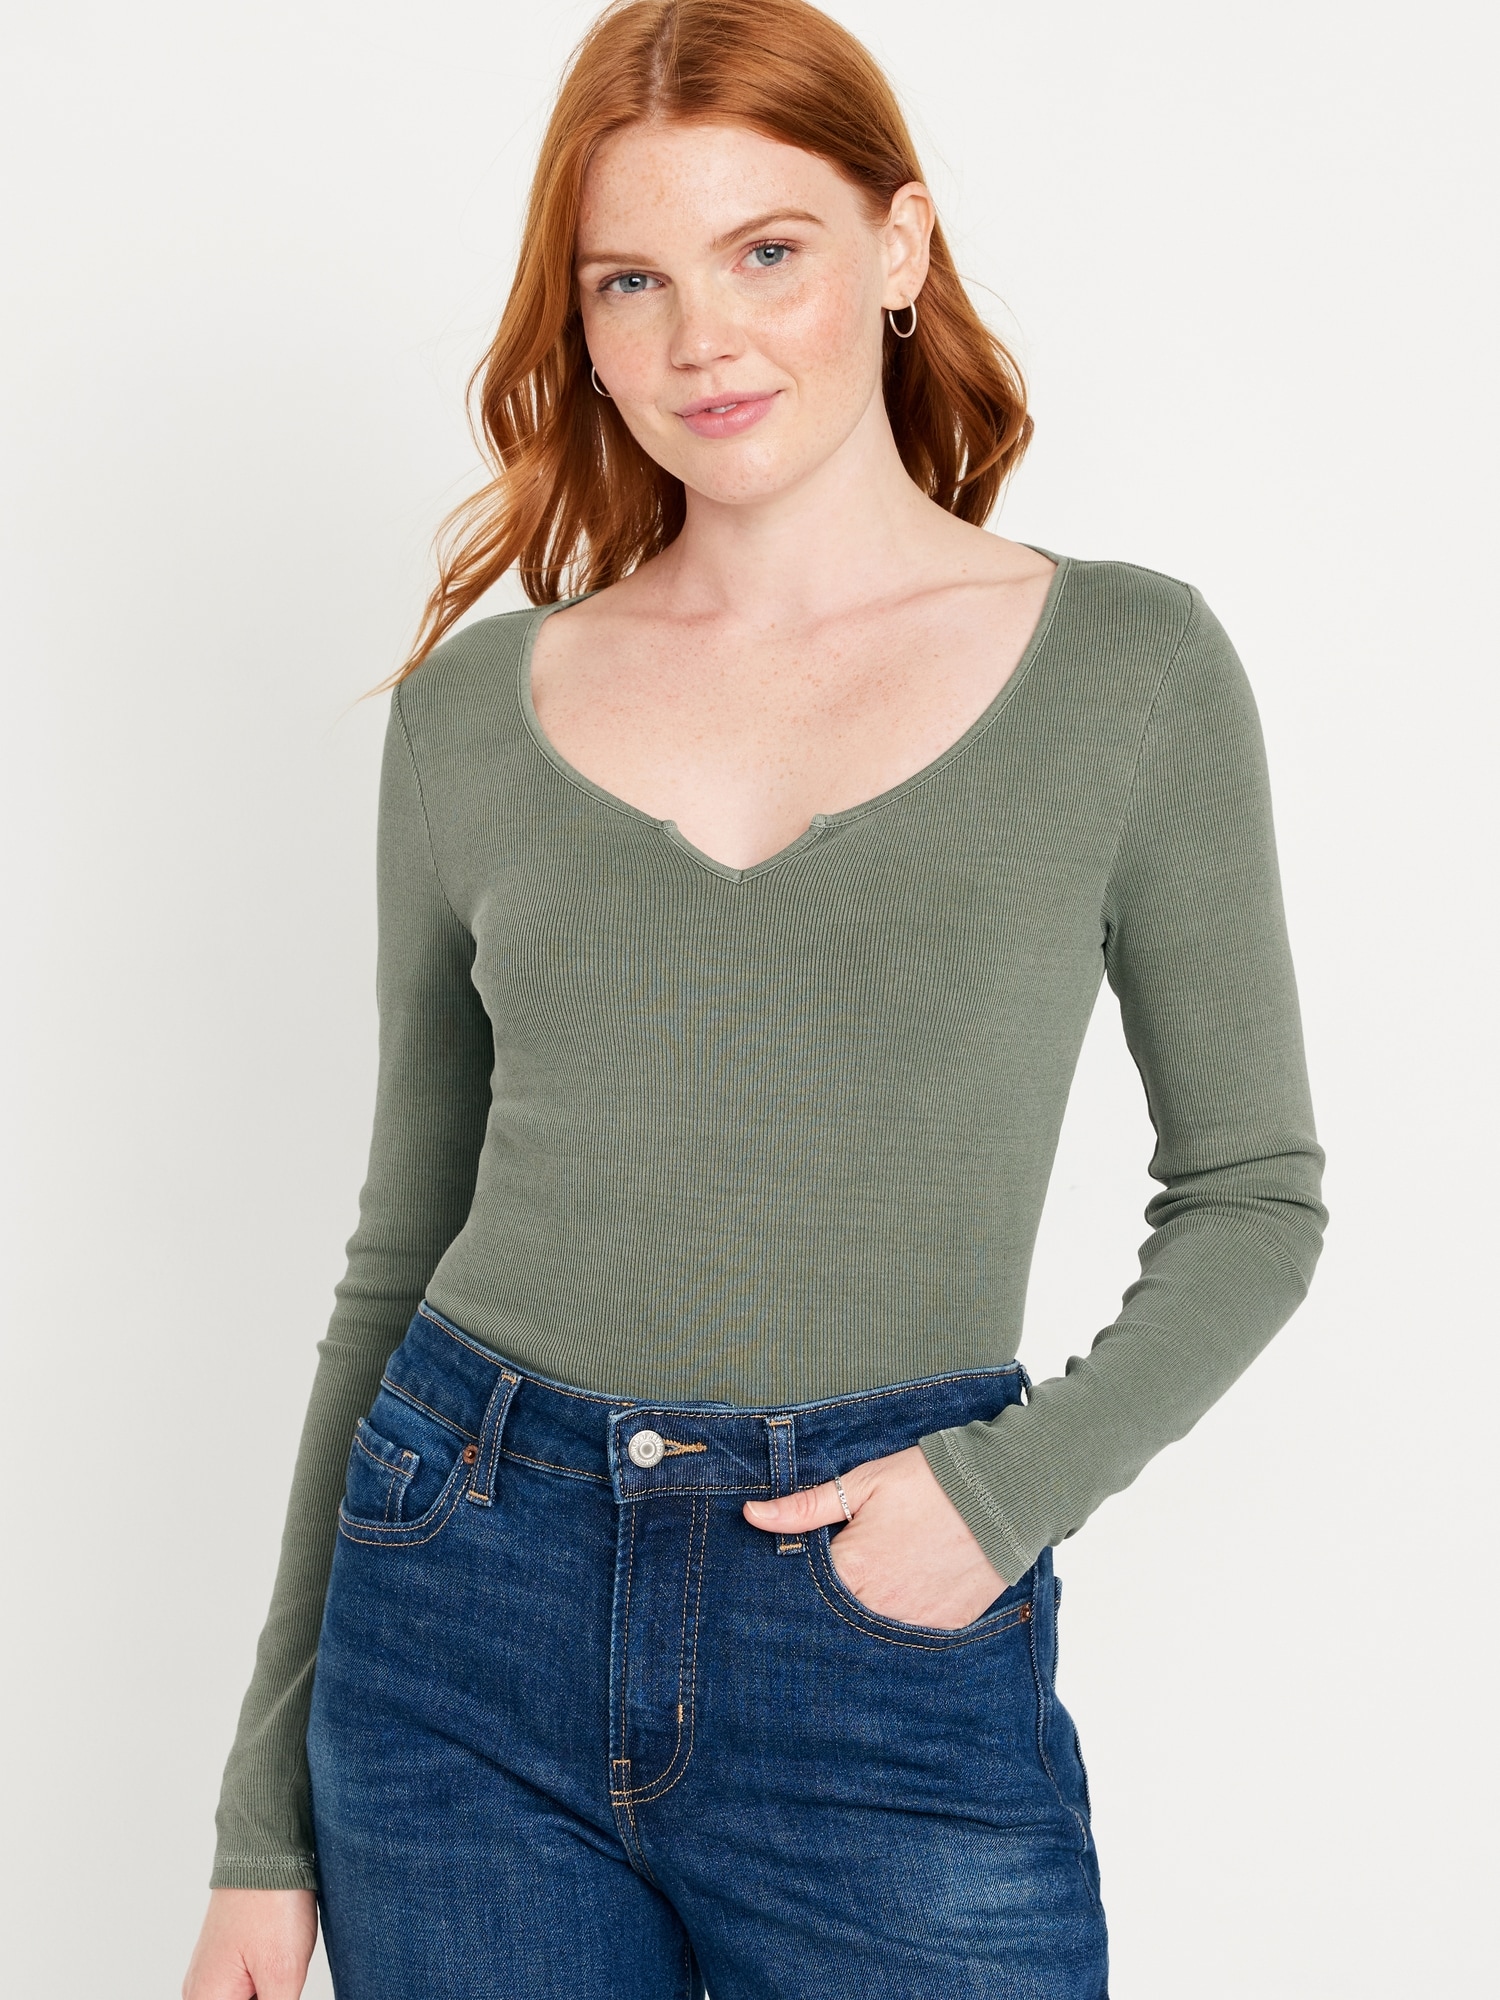 Old | Long-Sleeve T-Shirt Rib-Knit Women for Navy Fitted